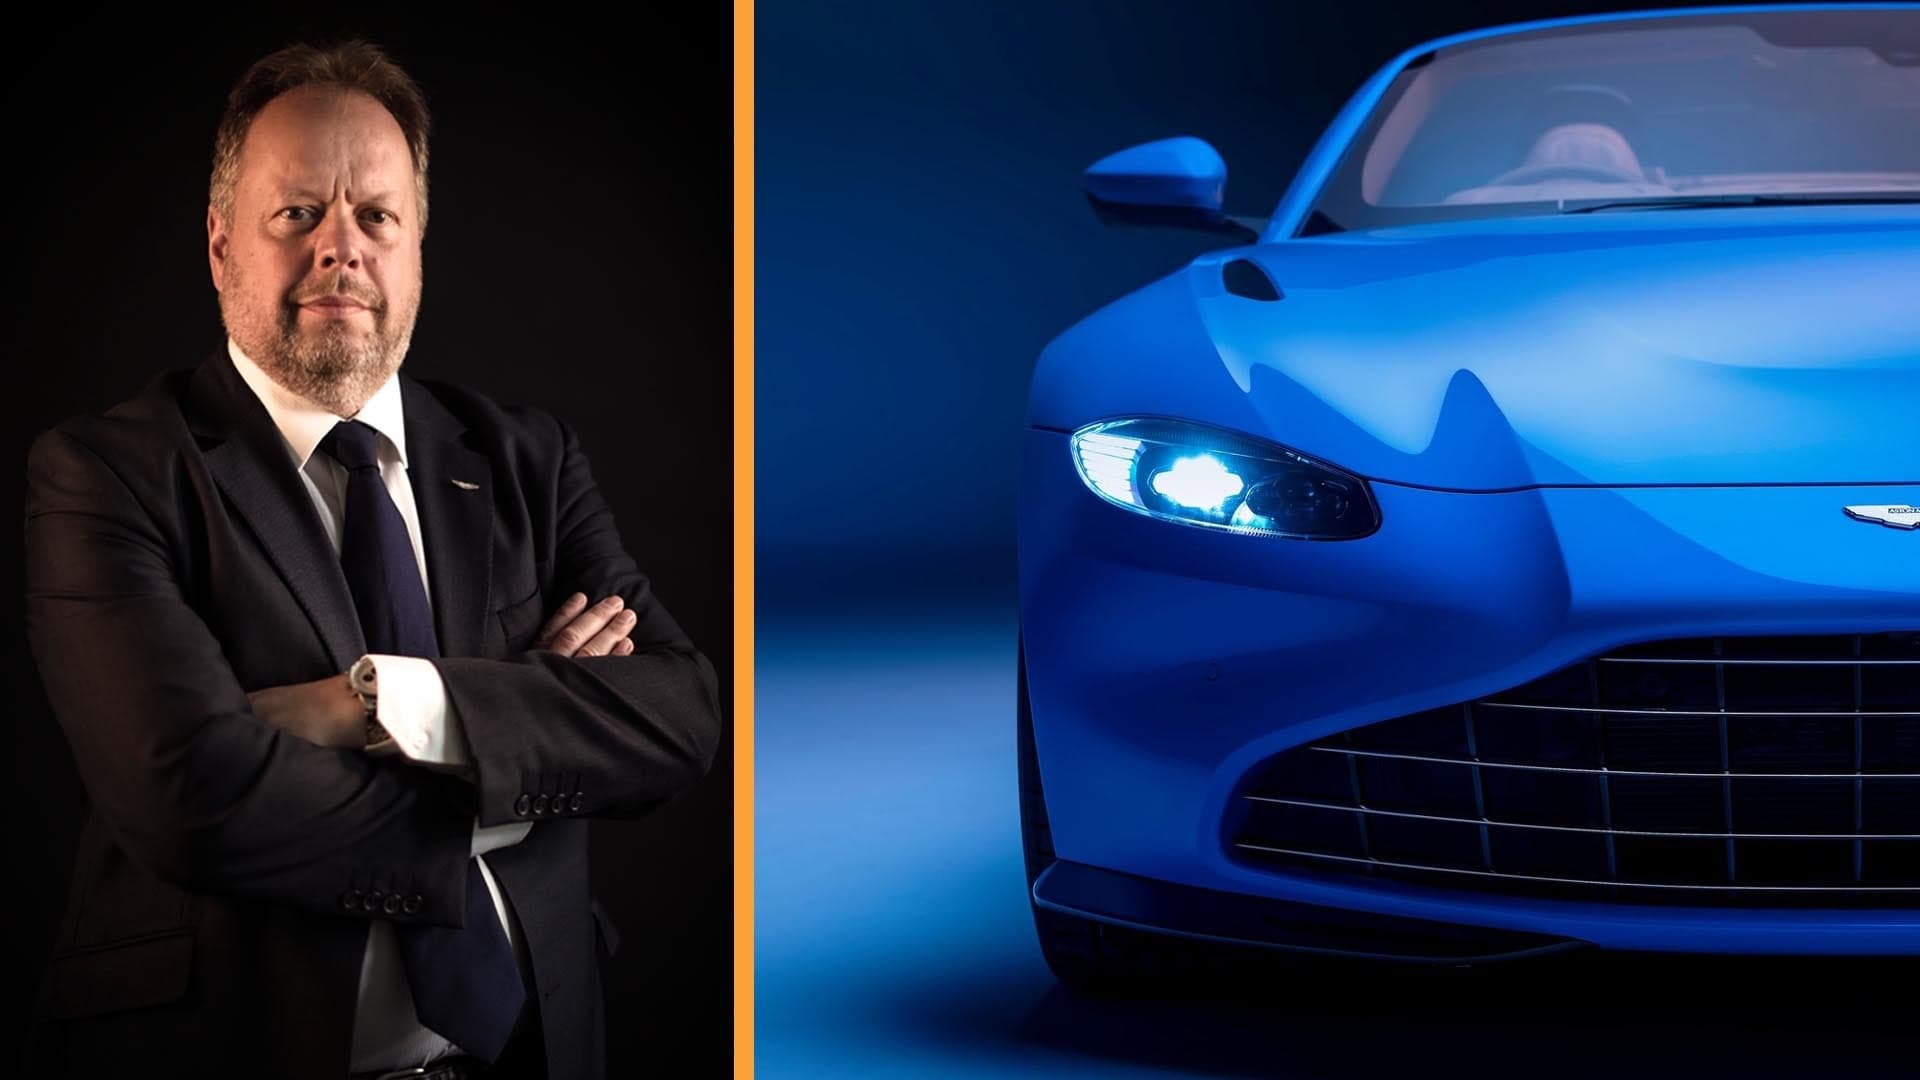 Aston Martin CEO Andy Palmer Out as Share Price Craters: Report